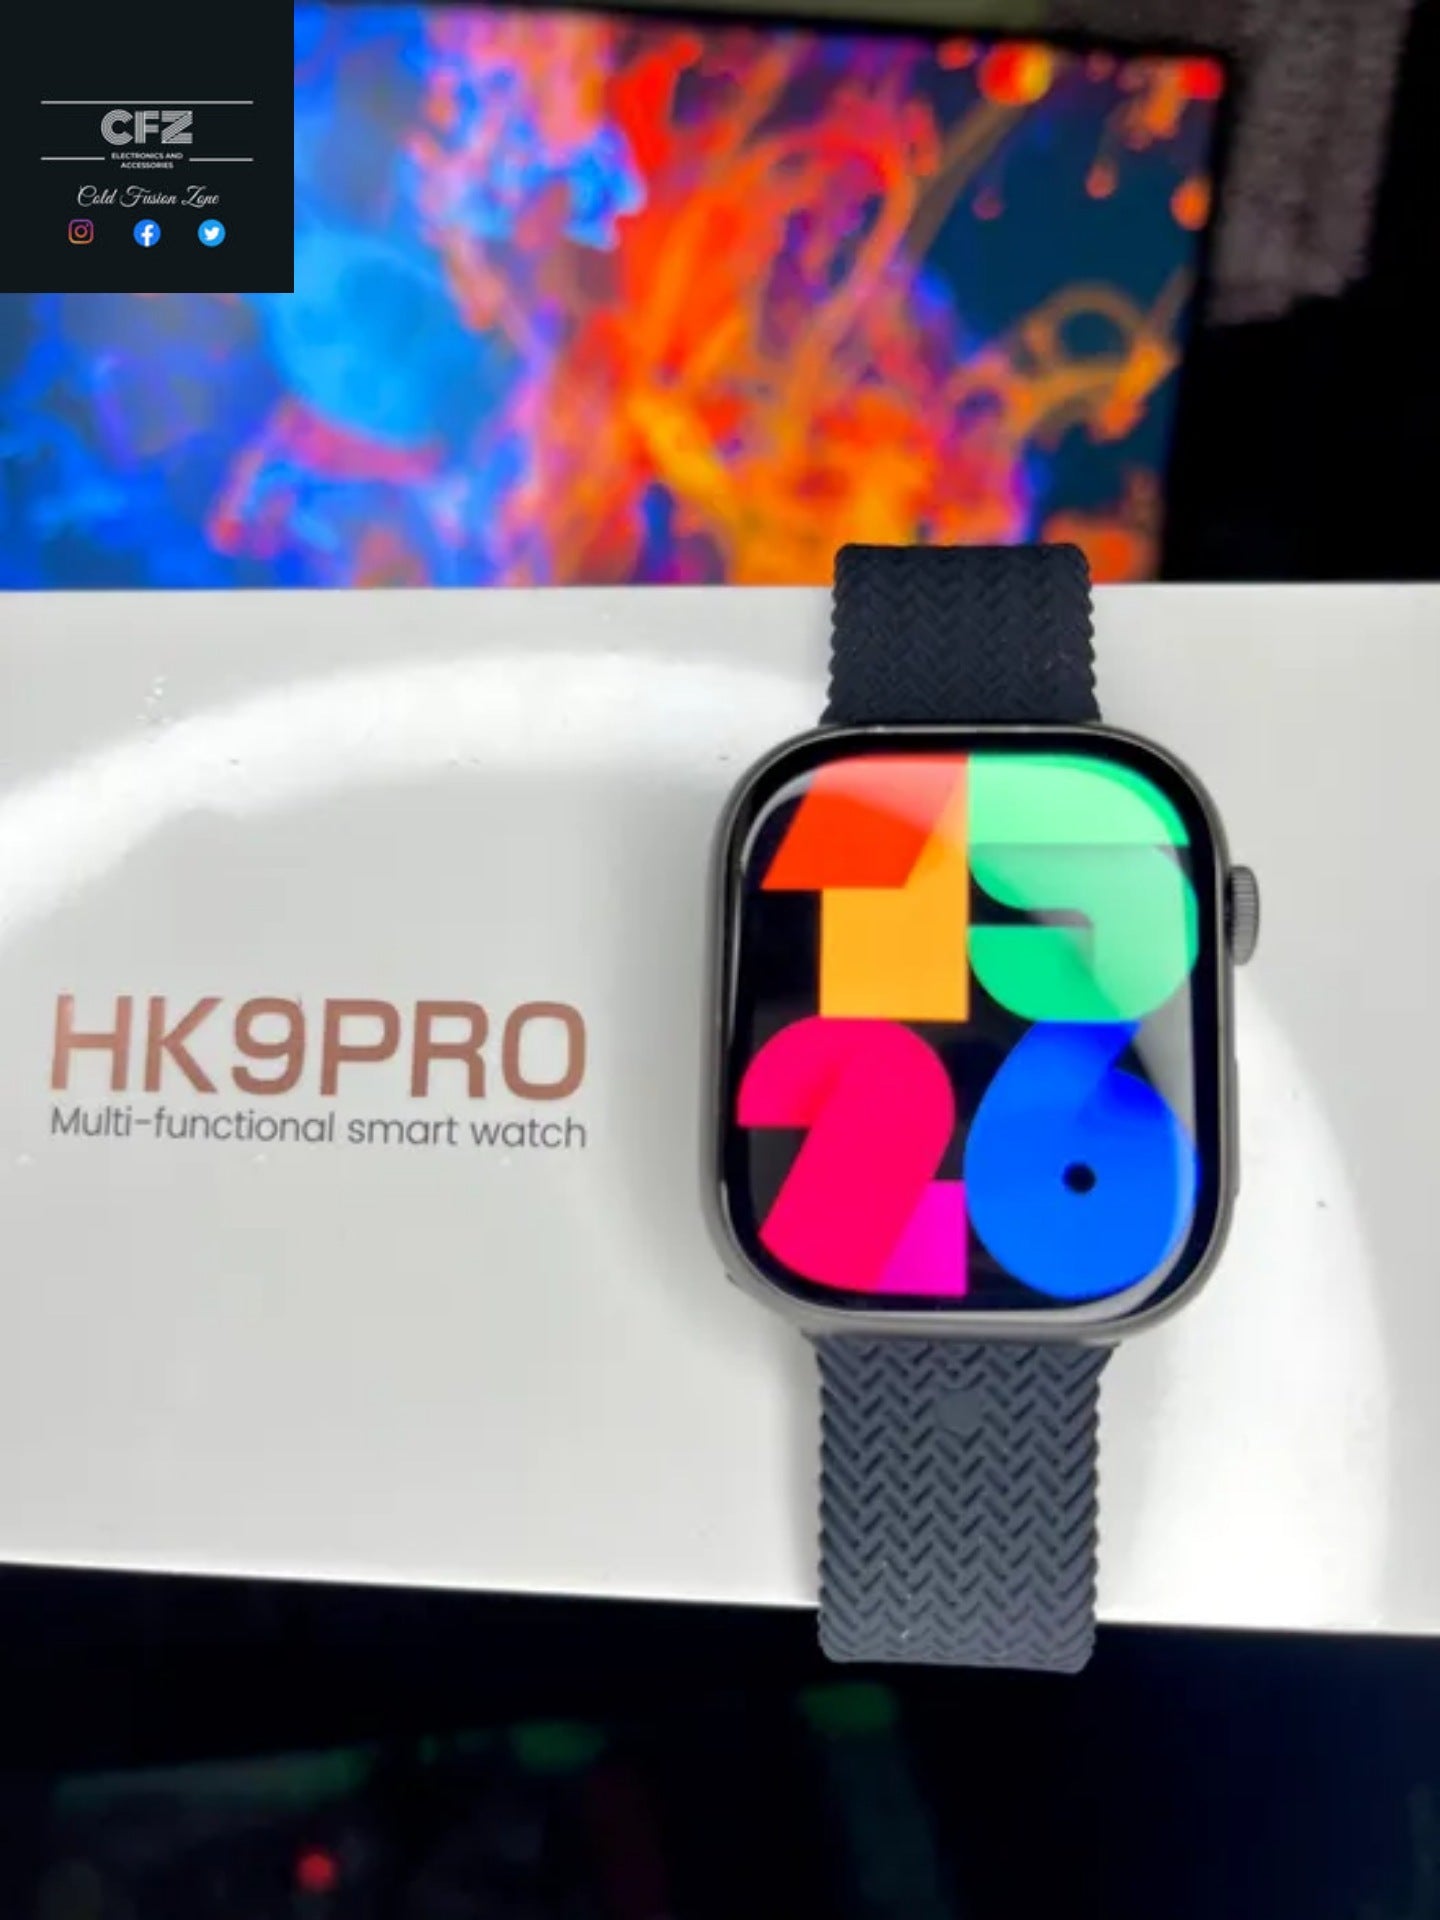 HK9 Ultra 2 AMOLED Smartwatch with ChatGPT